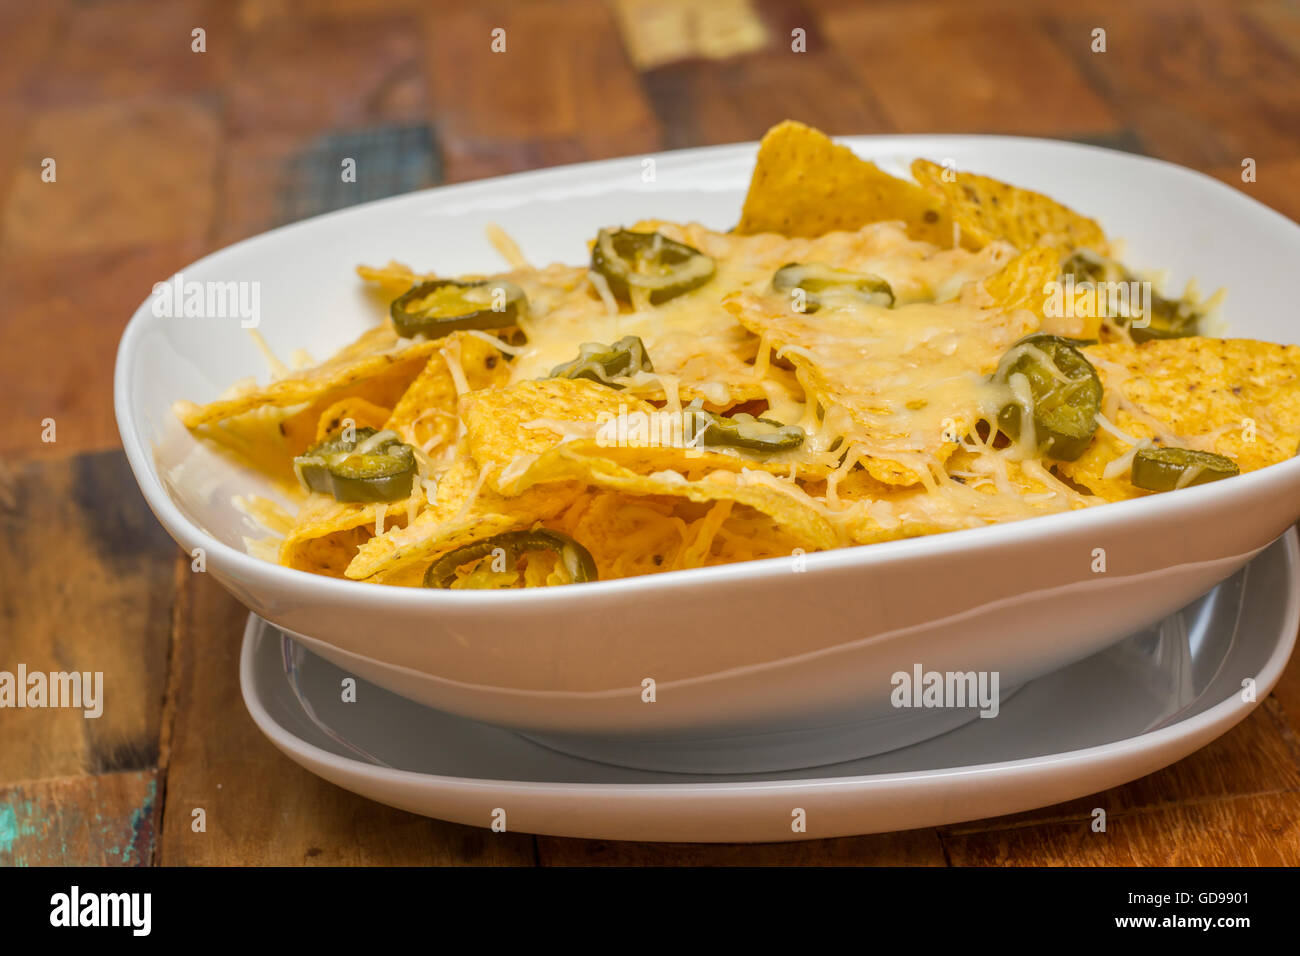 Nachos cheese with cheese and jalapenos in a white bowl Stock Photo